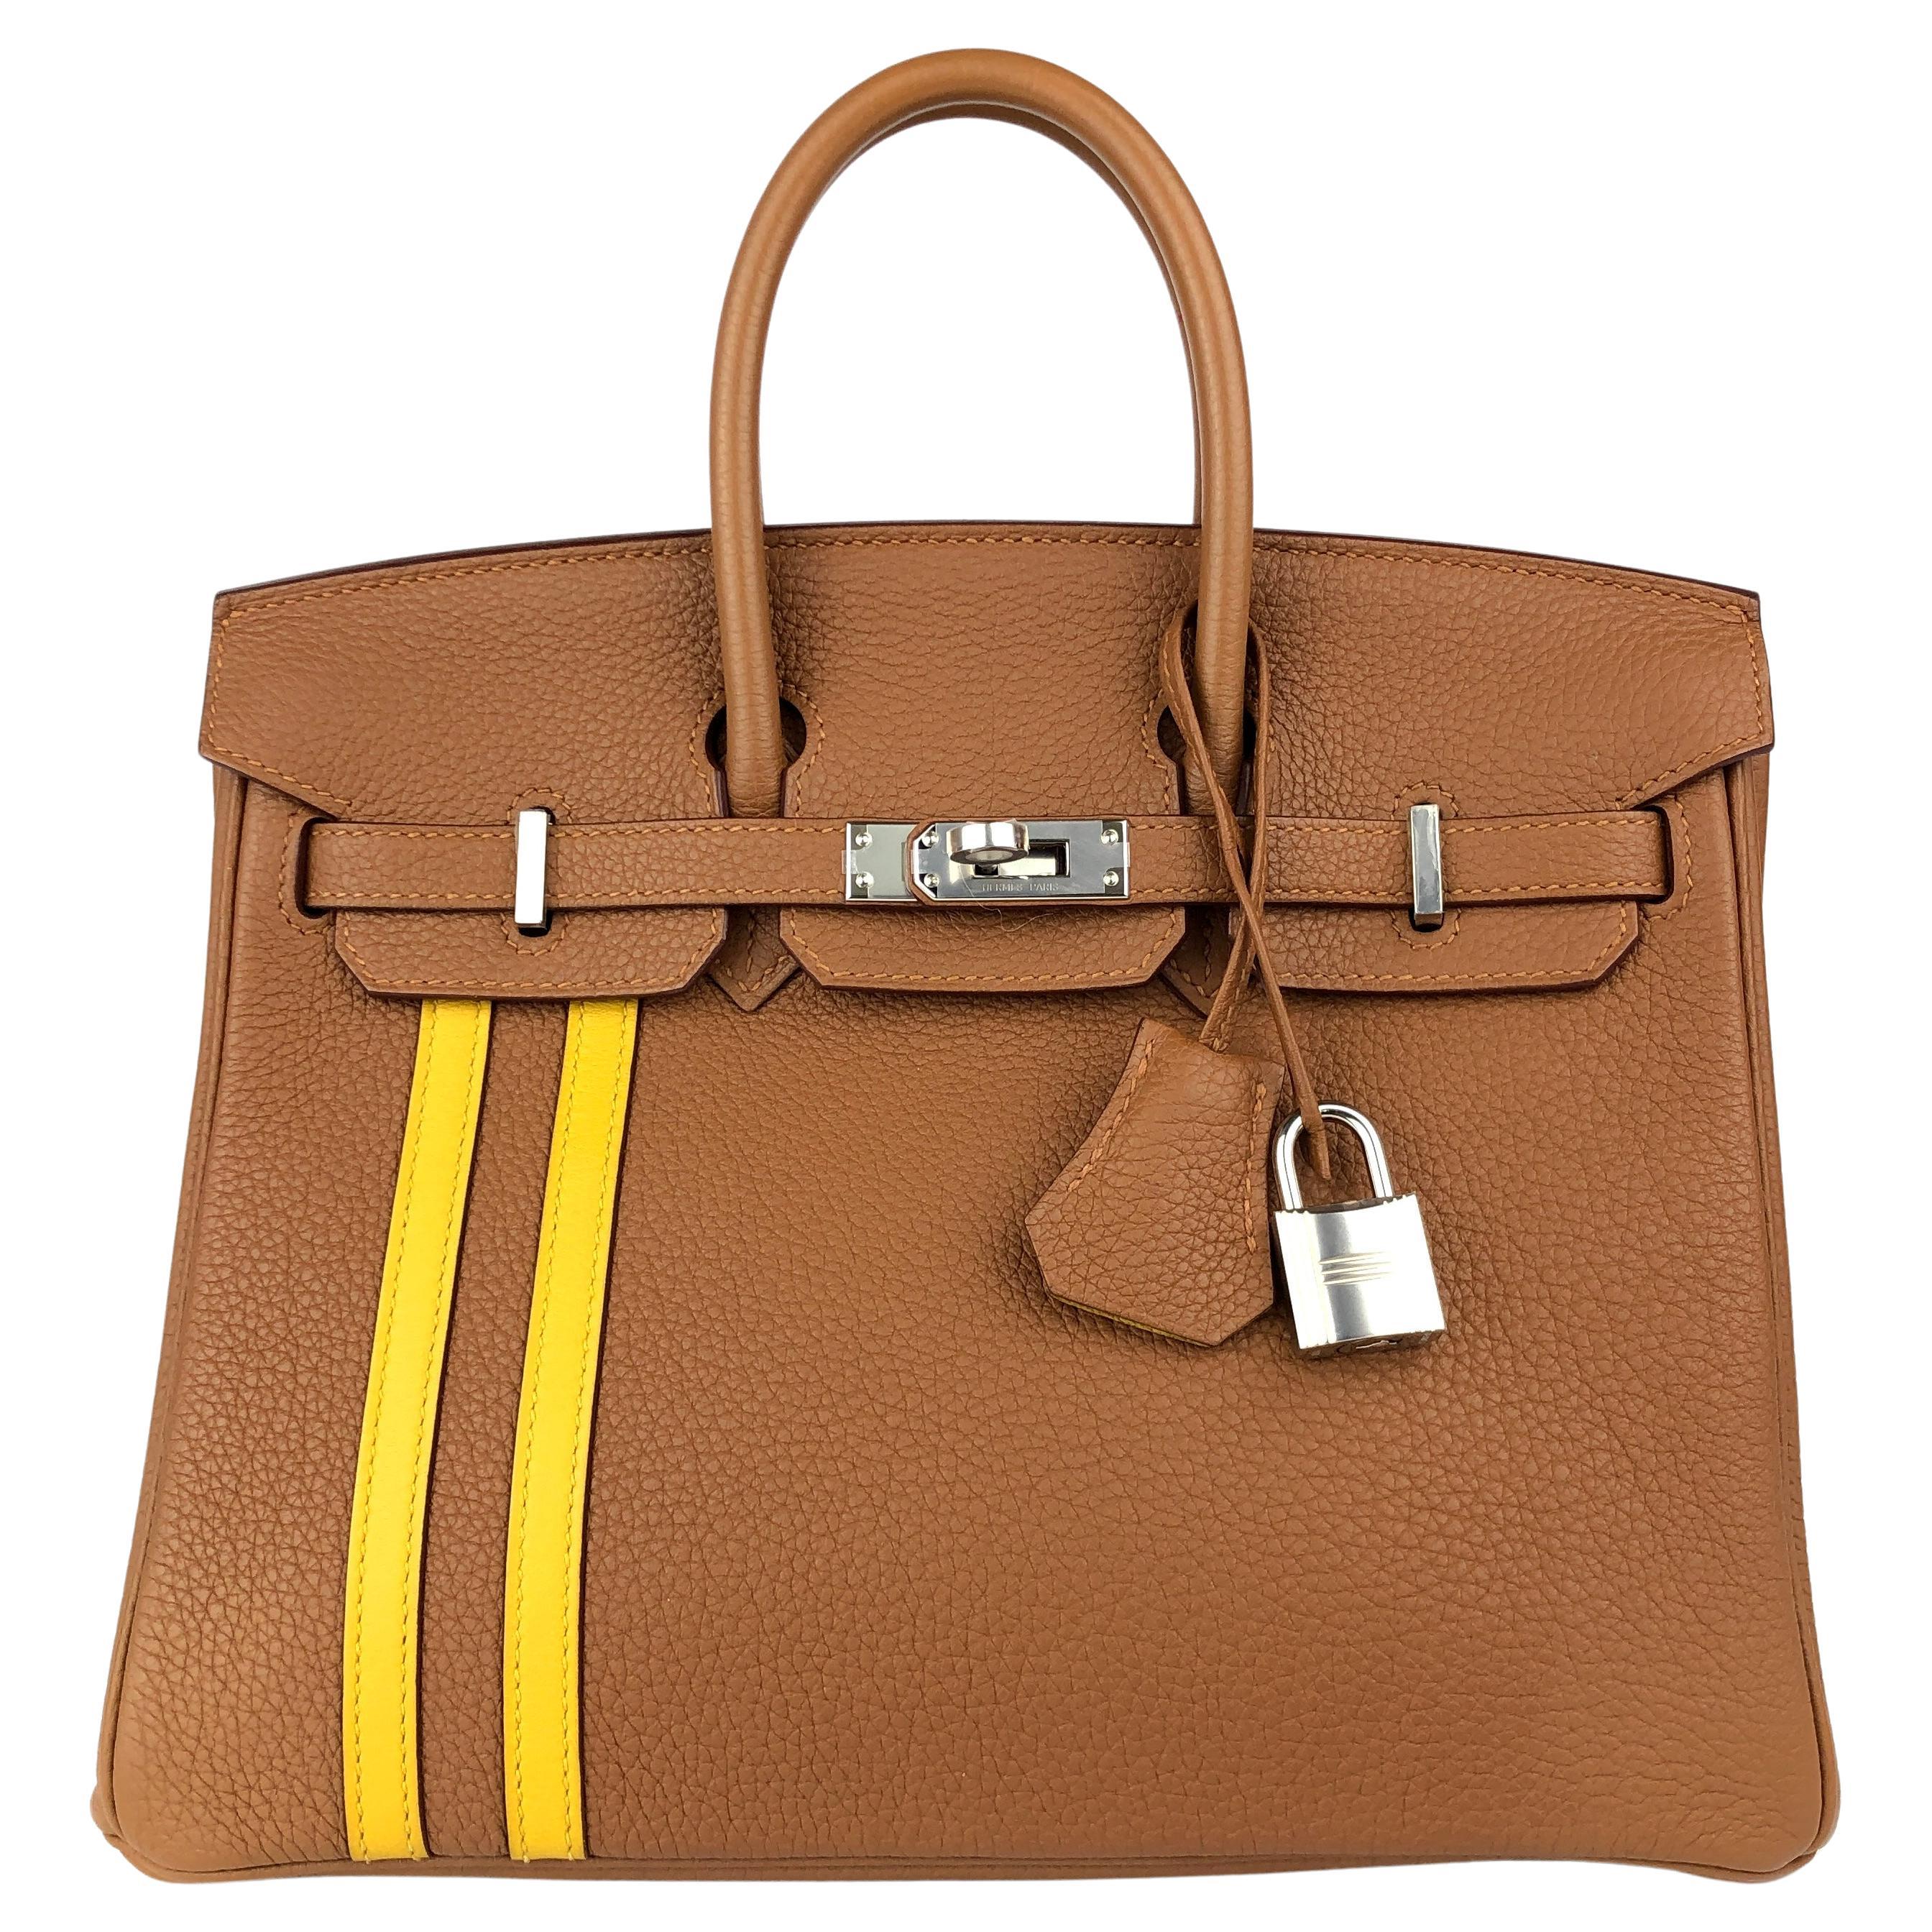 Why is Birkin bag so expensive?